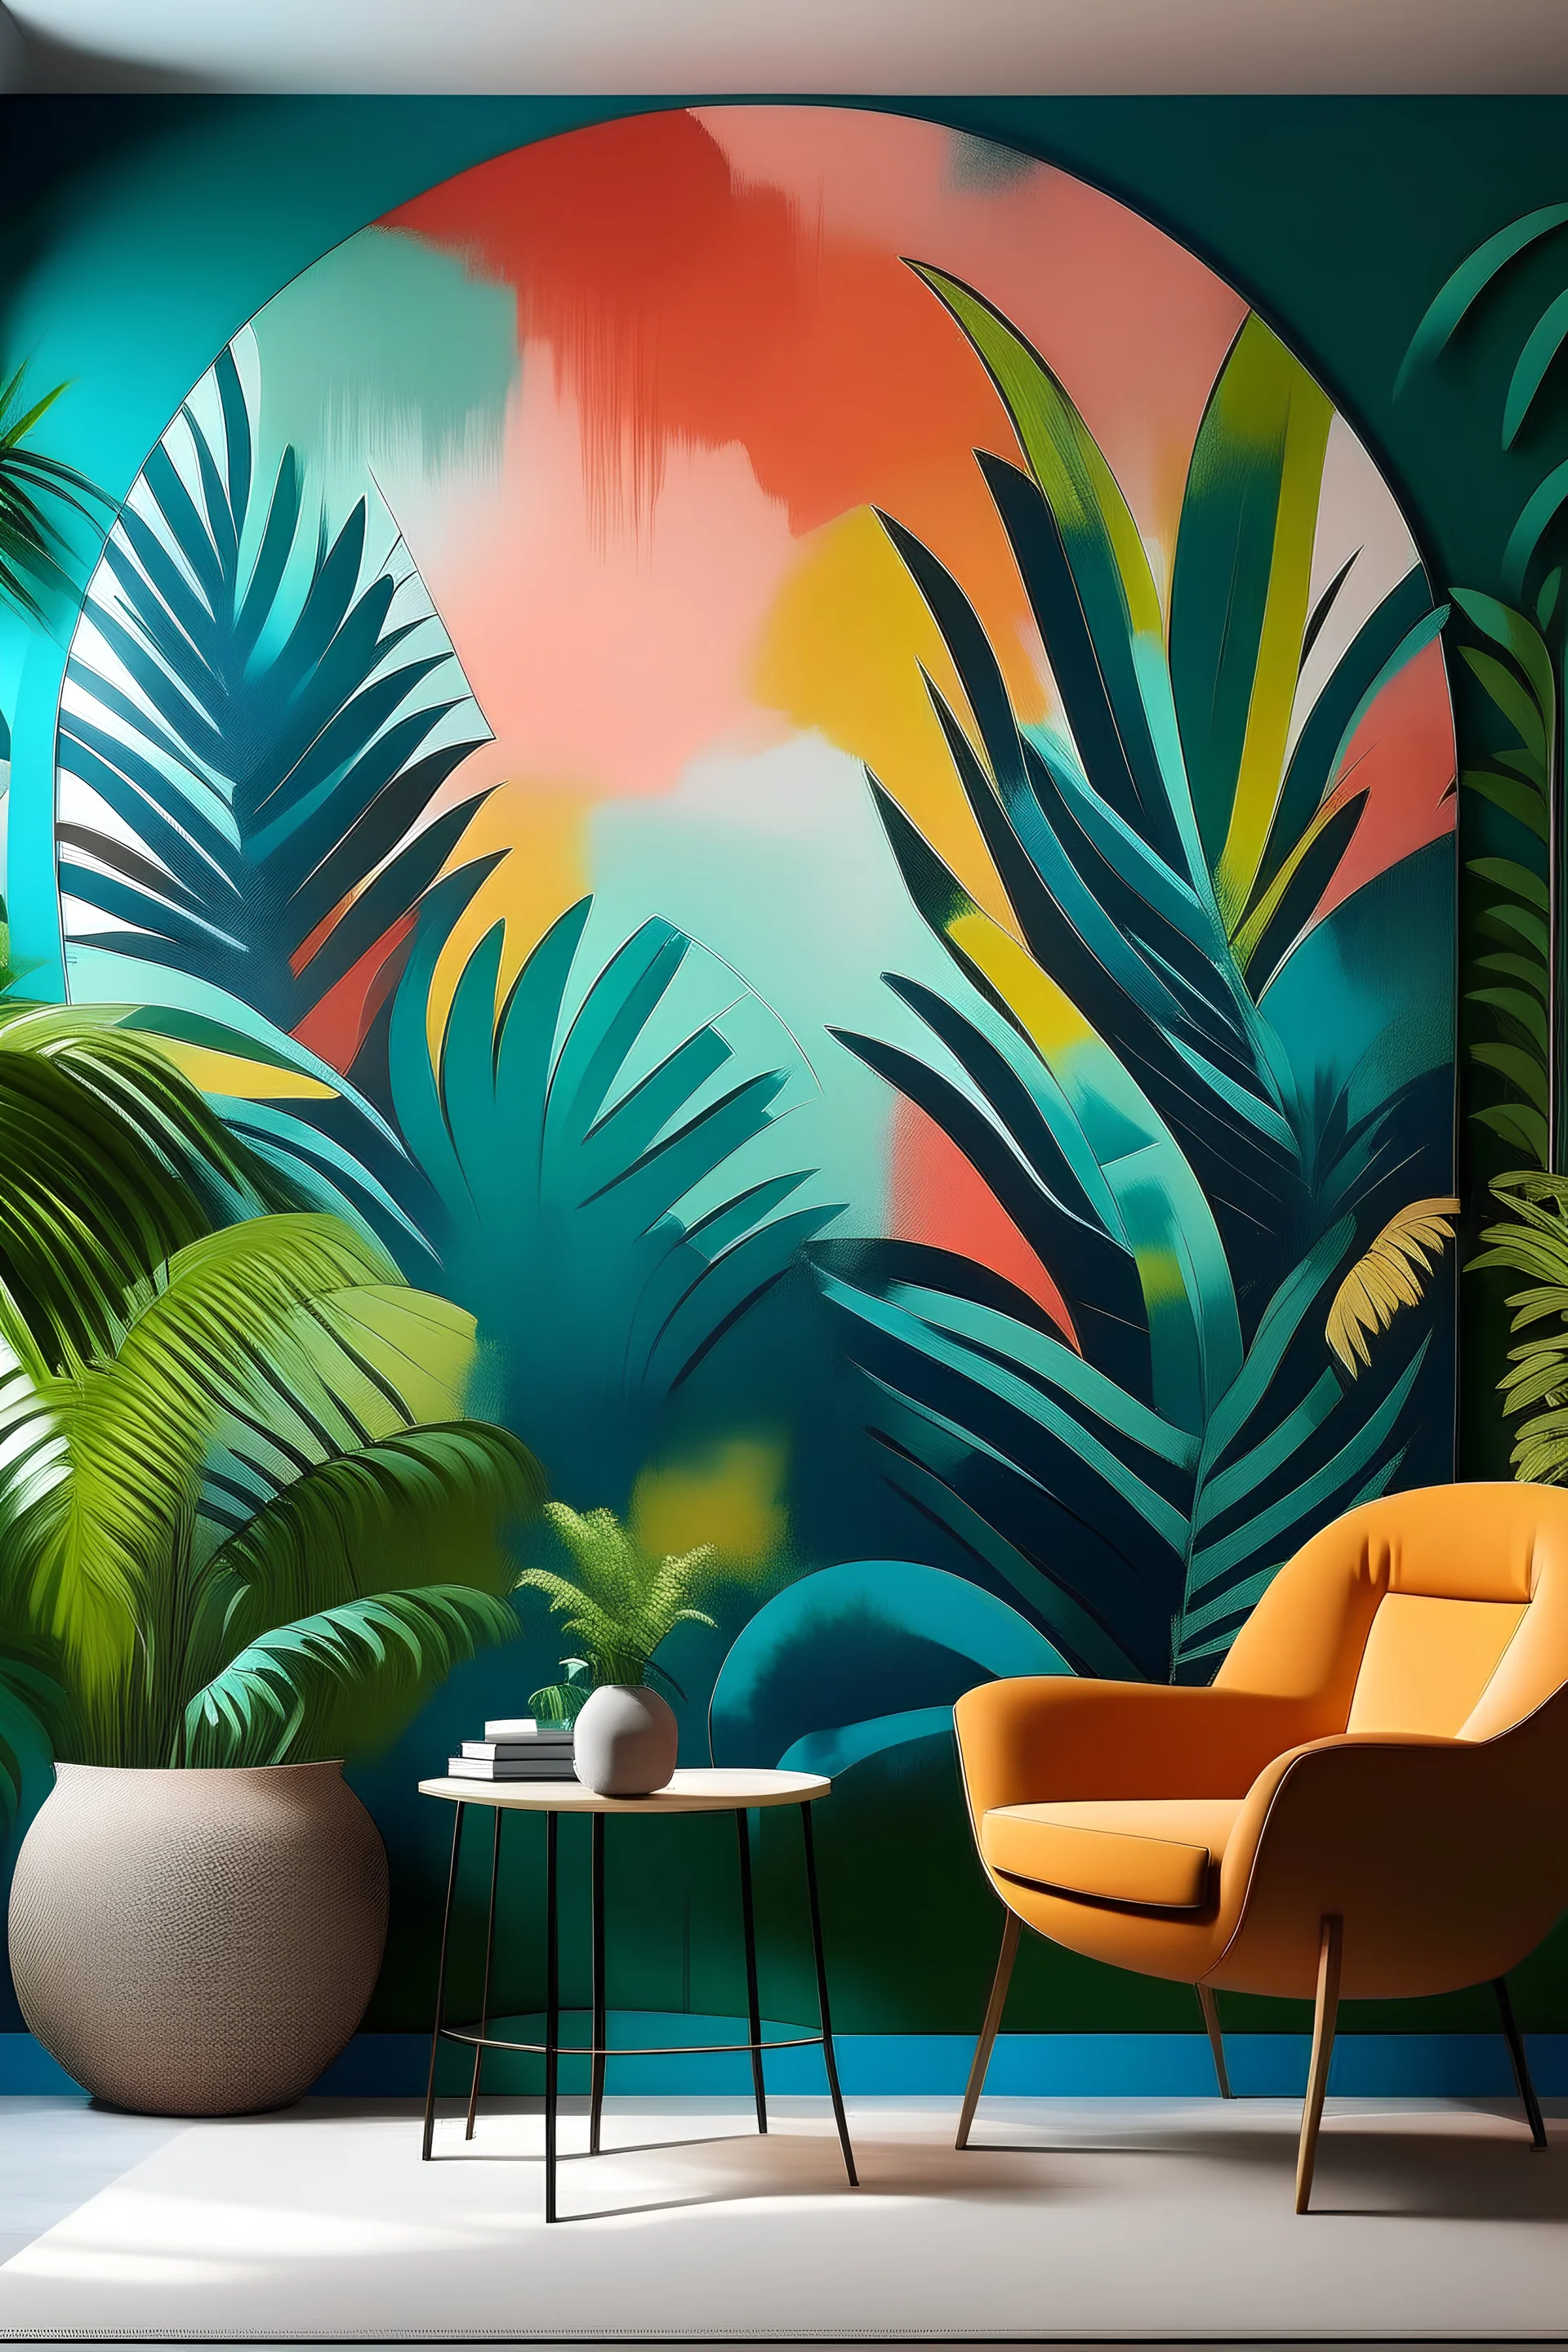 Create a hand-painted muraL with overlapping ovals in tropical hues, evoking the feeling of a serene oasis with a touch of vibrant energy